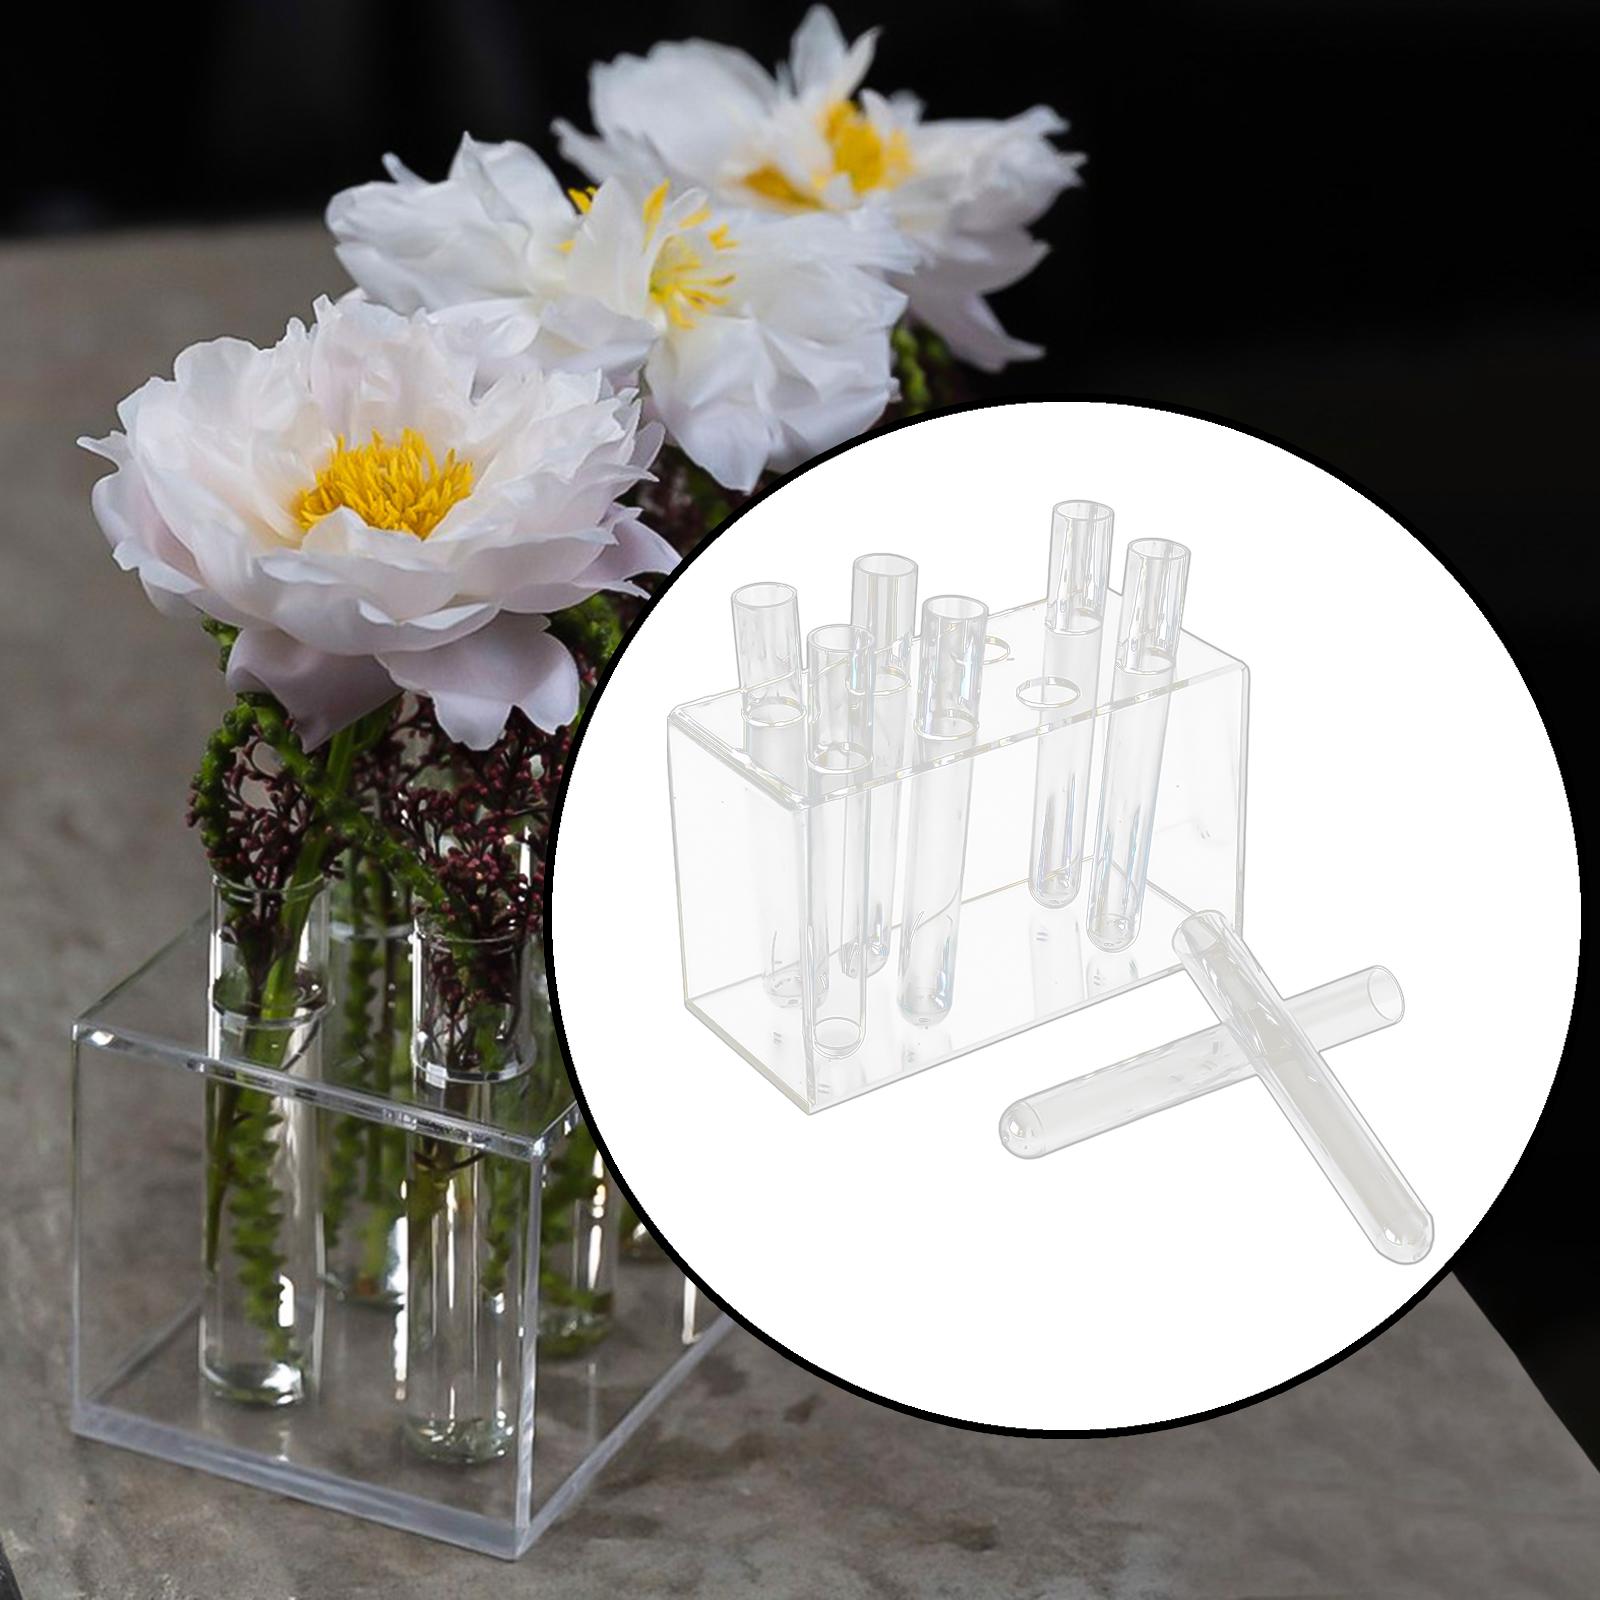 Propagation Station Test Tube Vases for Flowers for Centerpieces Home Office 8 Test Tubes